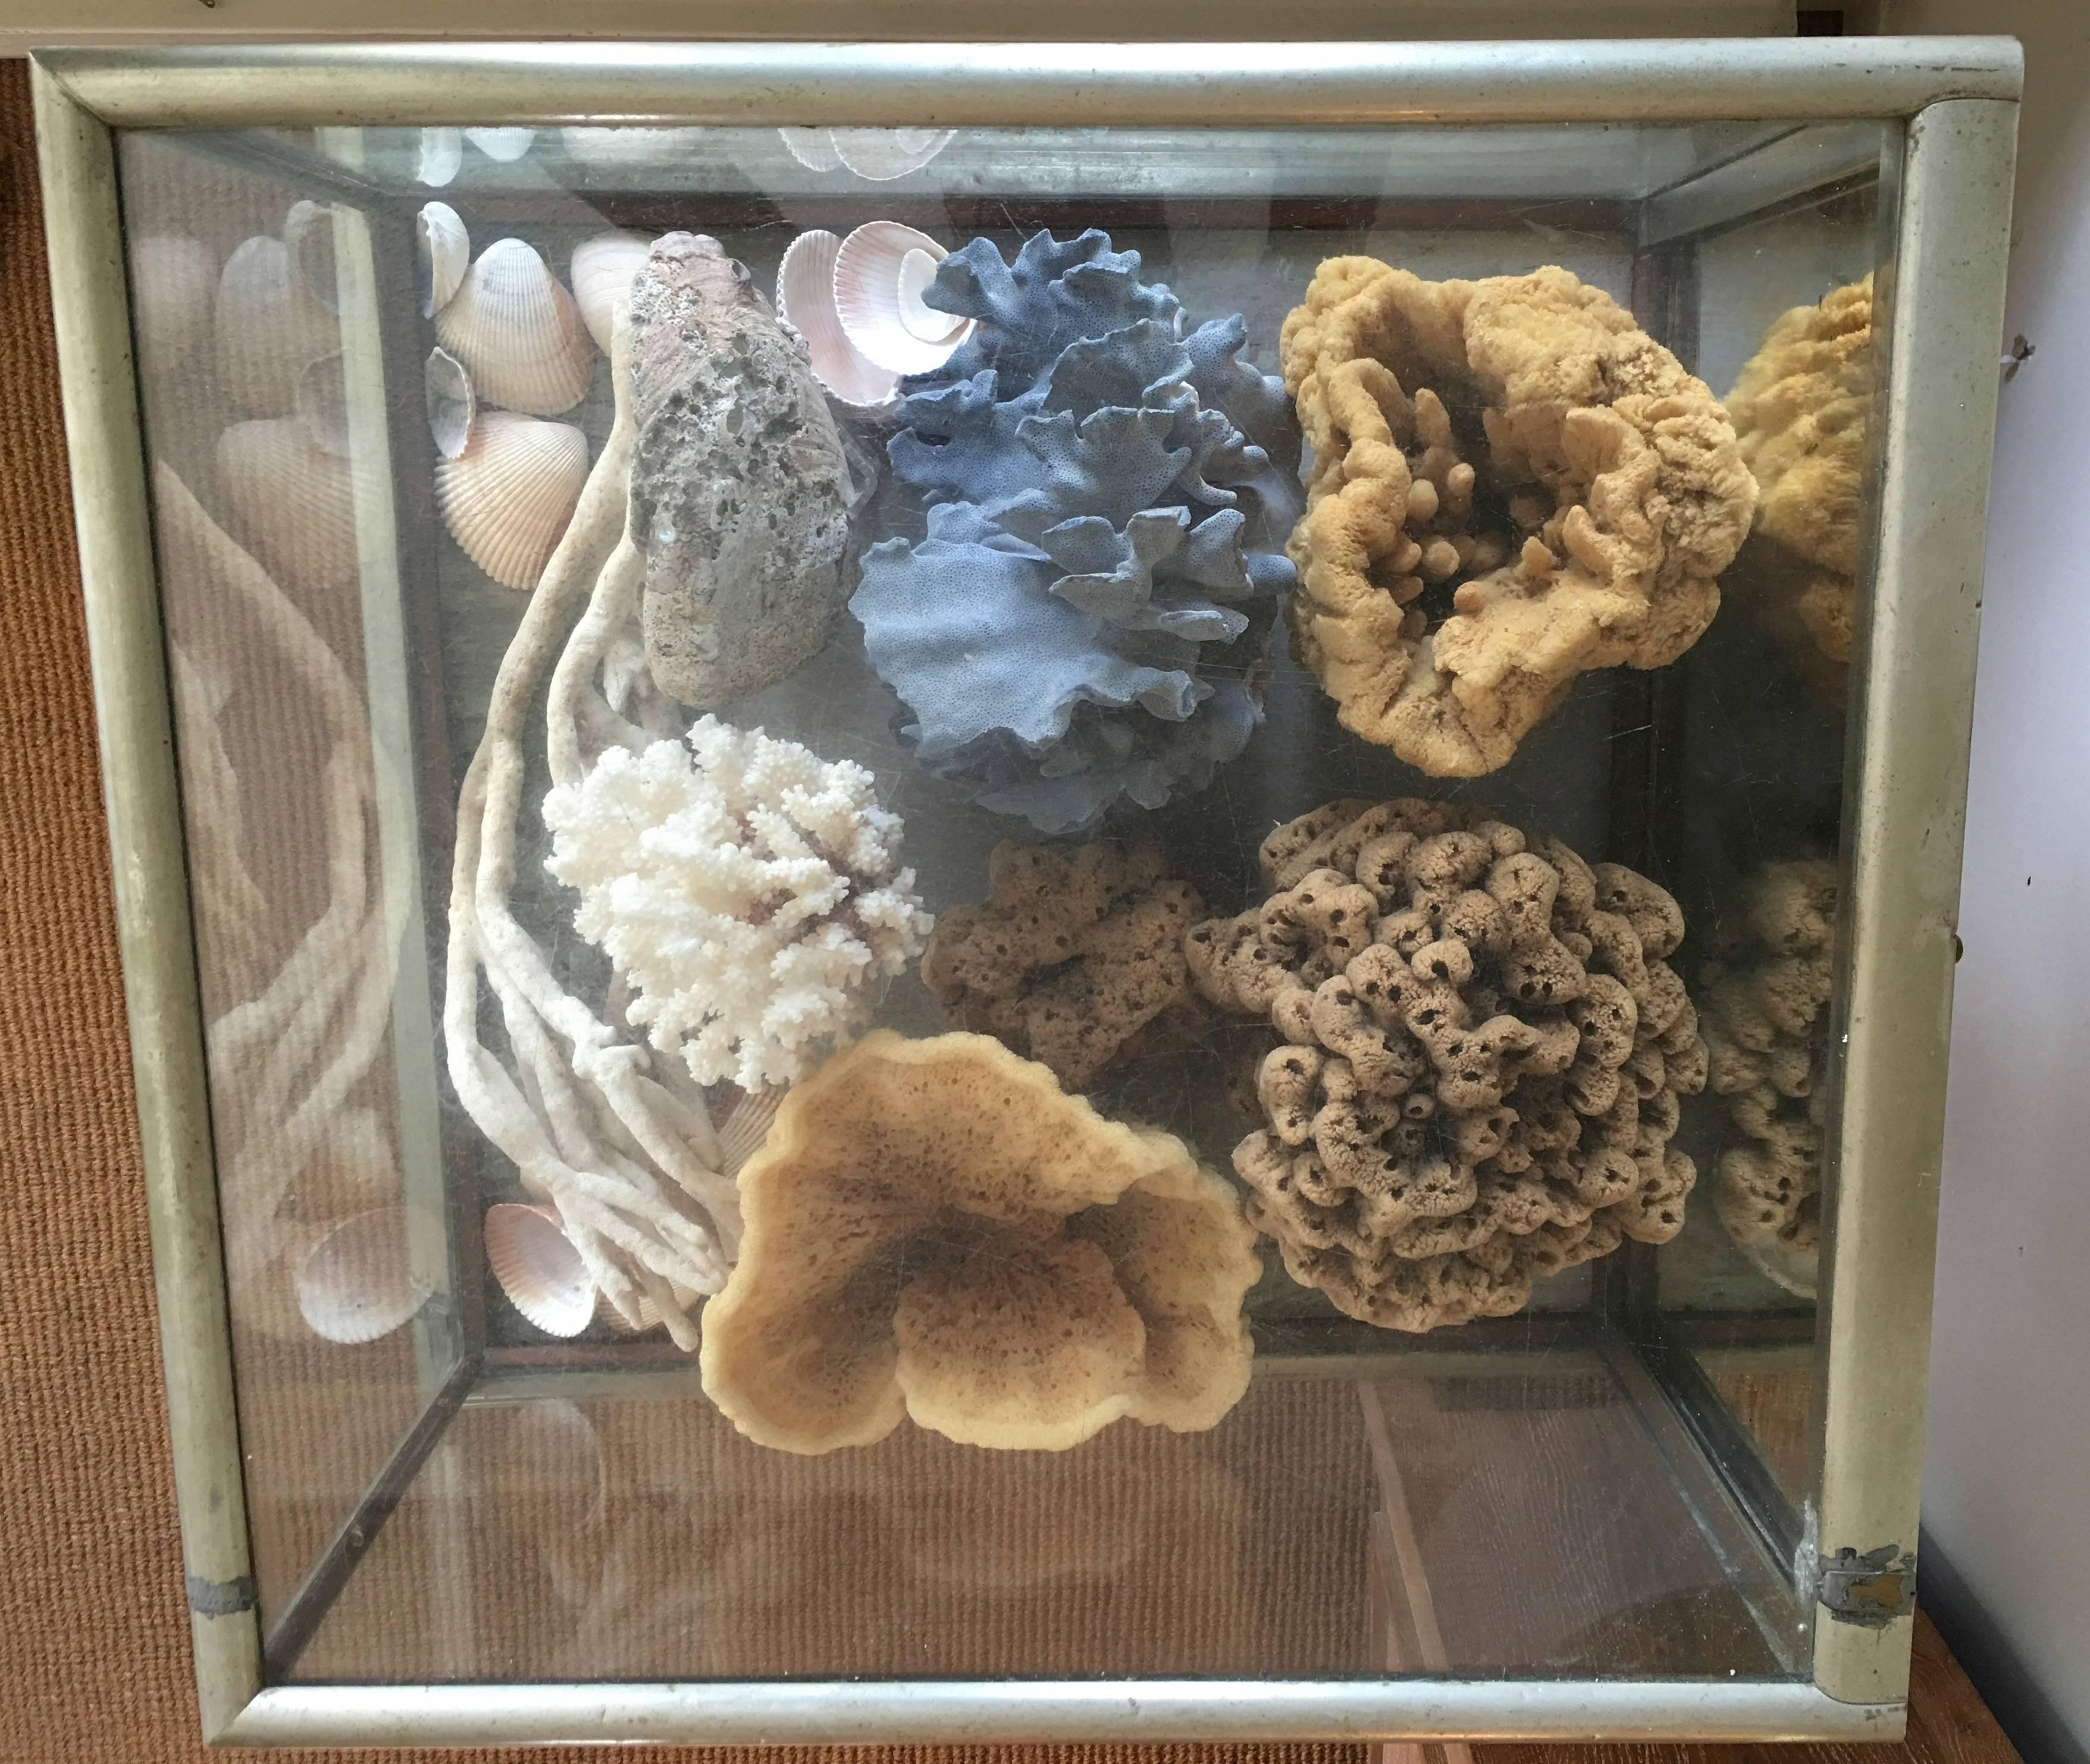 A  fabulous large, rectangular 19th century table top display case in nickel and glass, filled with a variety of old, legally collected sponges, with blue and white coral abalone and other small sea shells. The cabinet has a mirror paneled door on